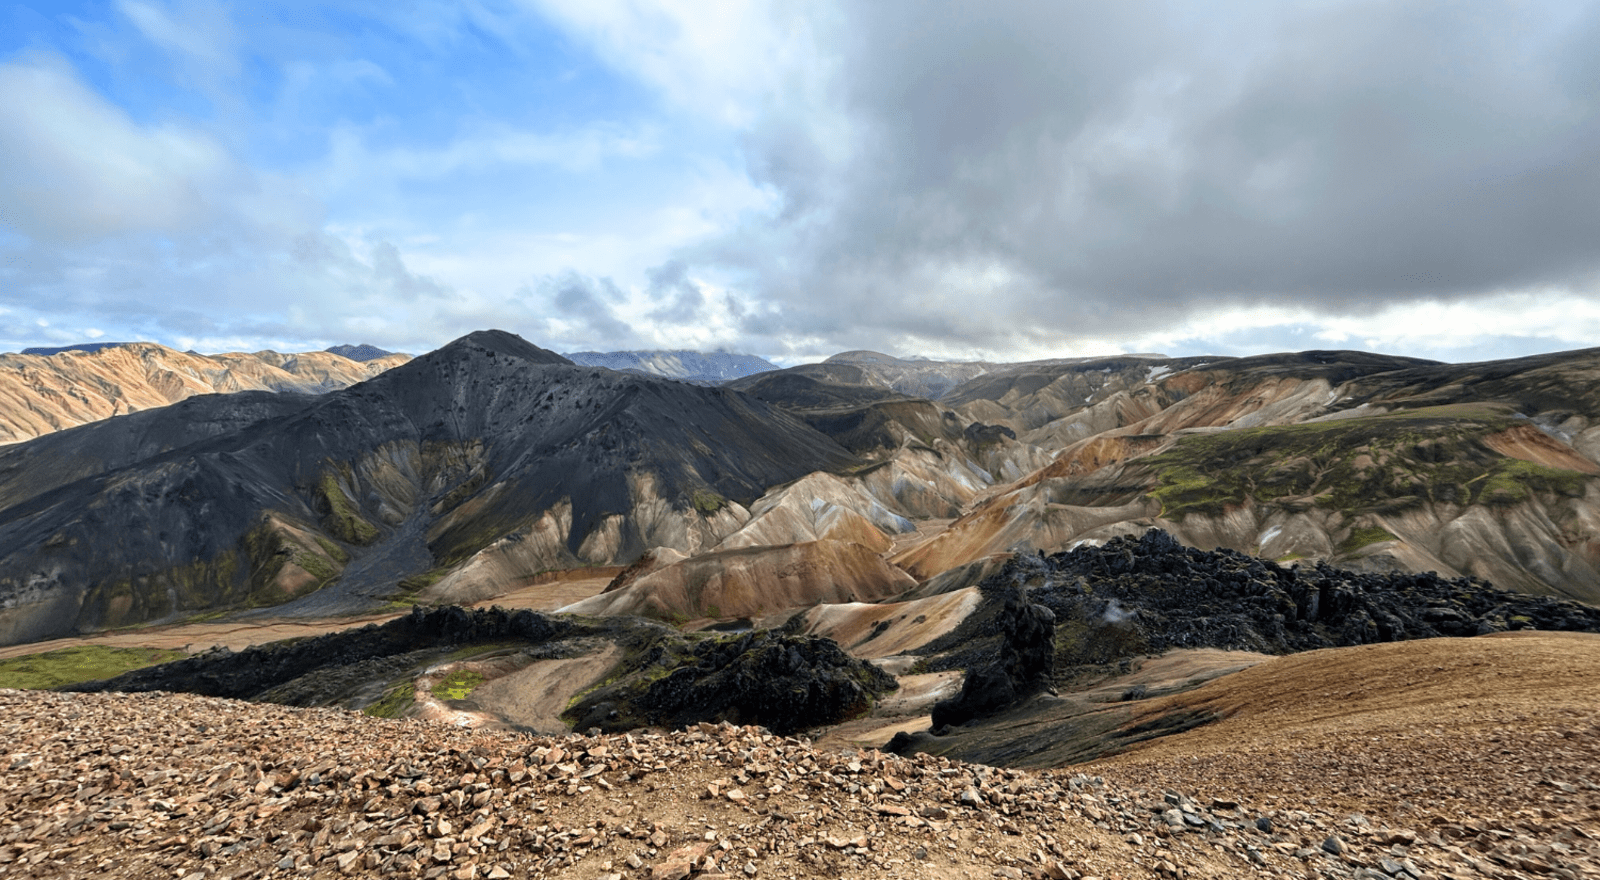 View from hiking trails in Landmannalaugar in the Highlands of Iceland